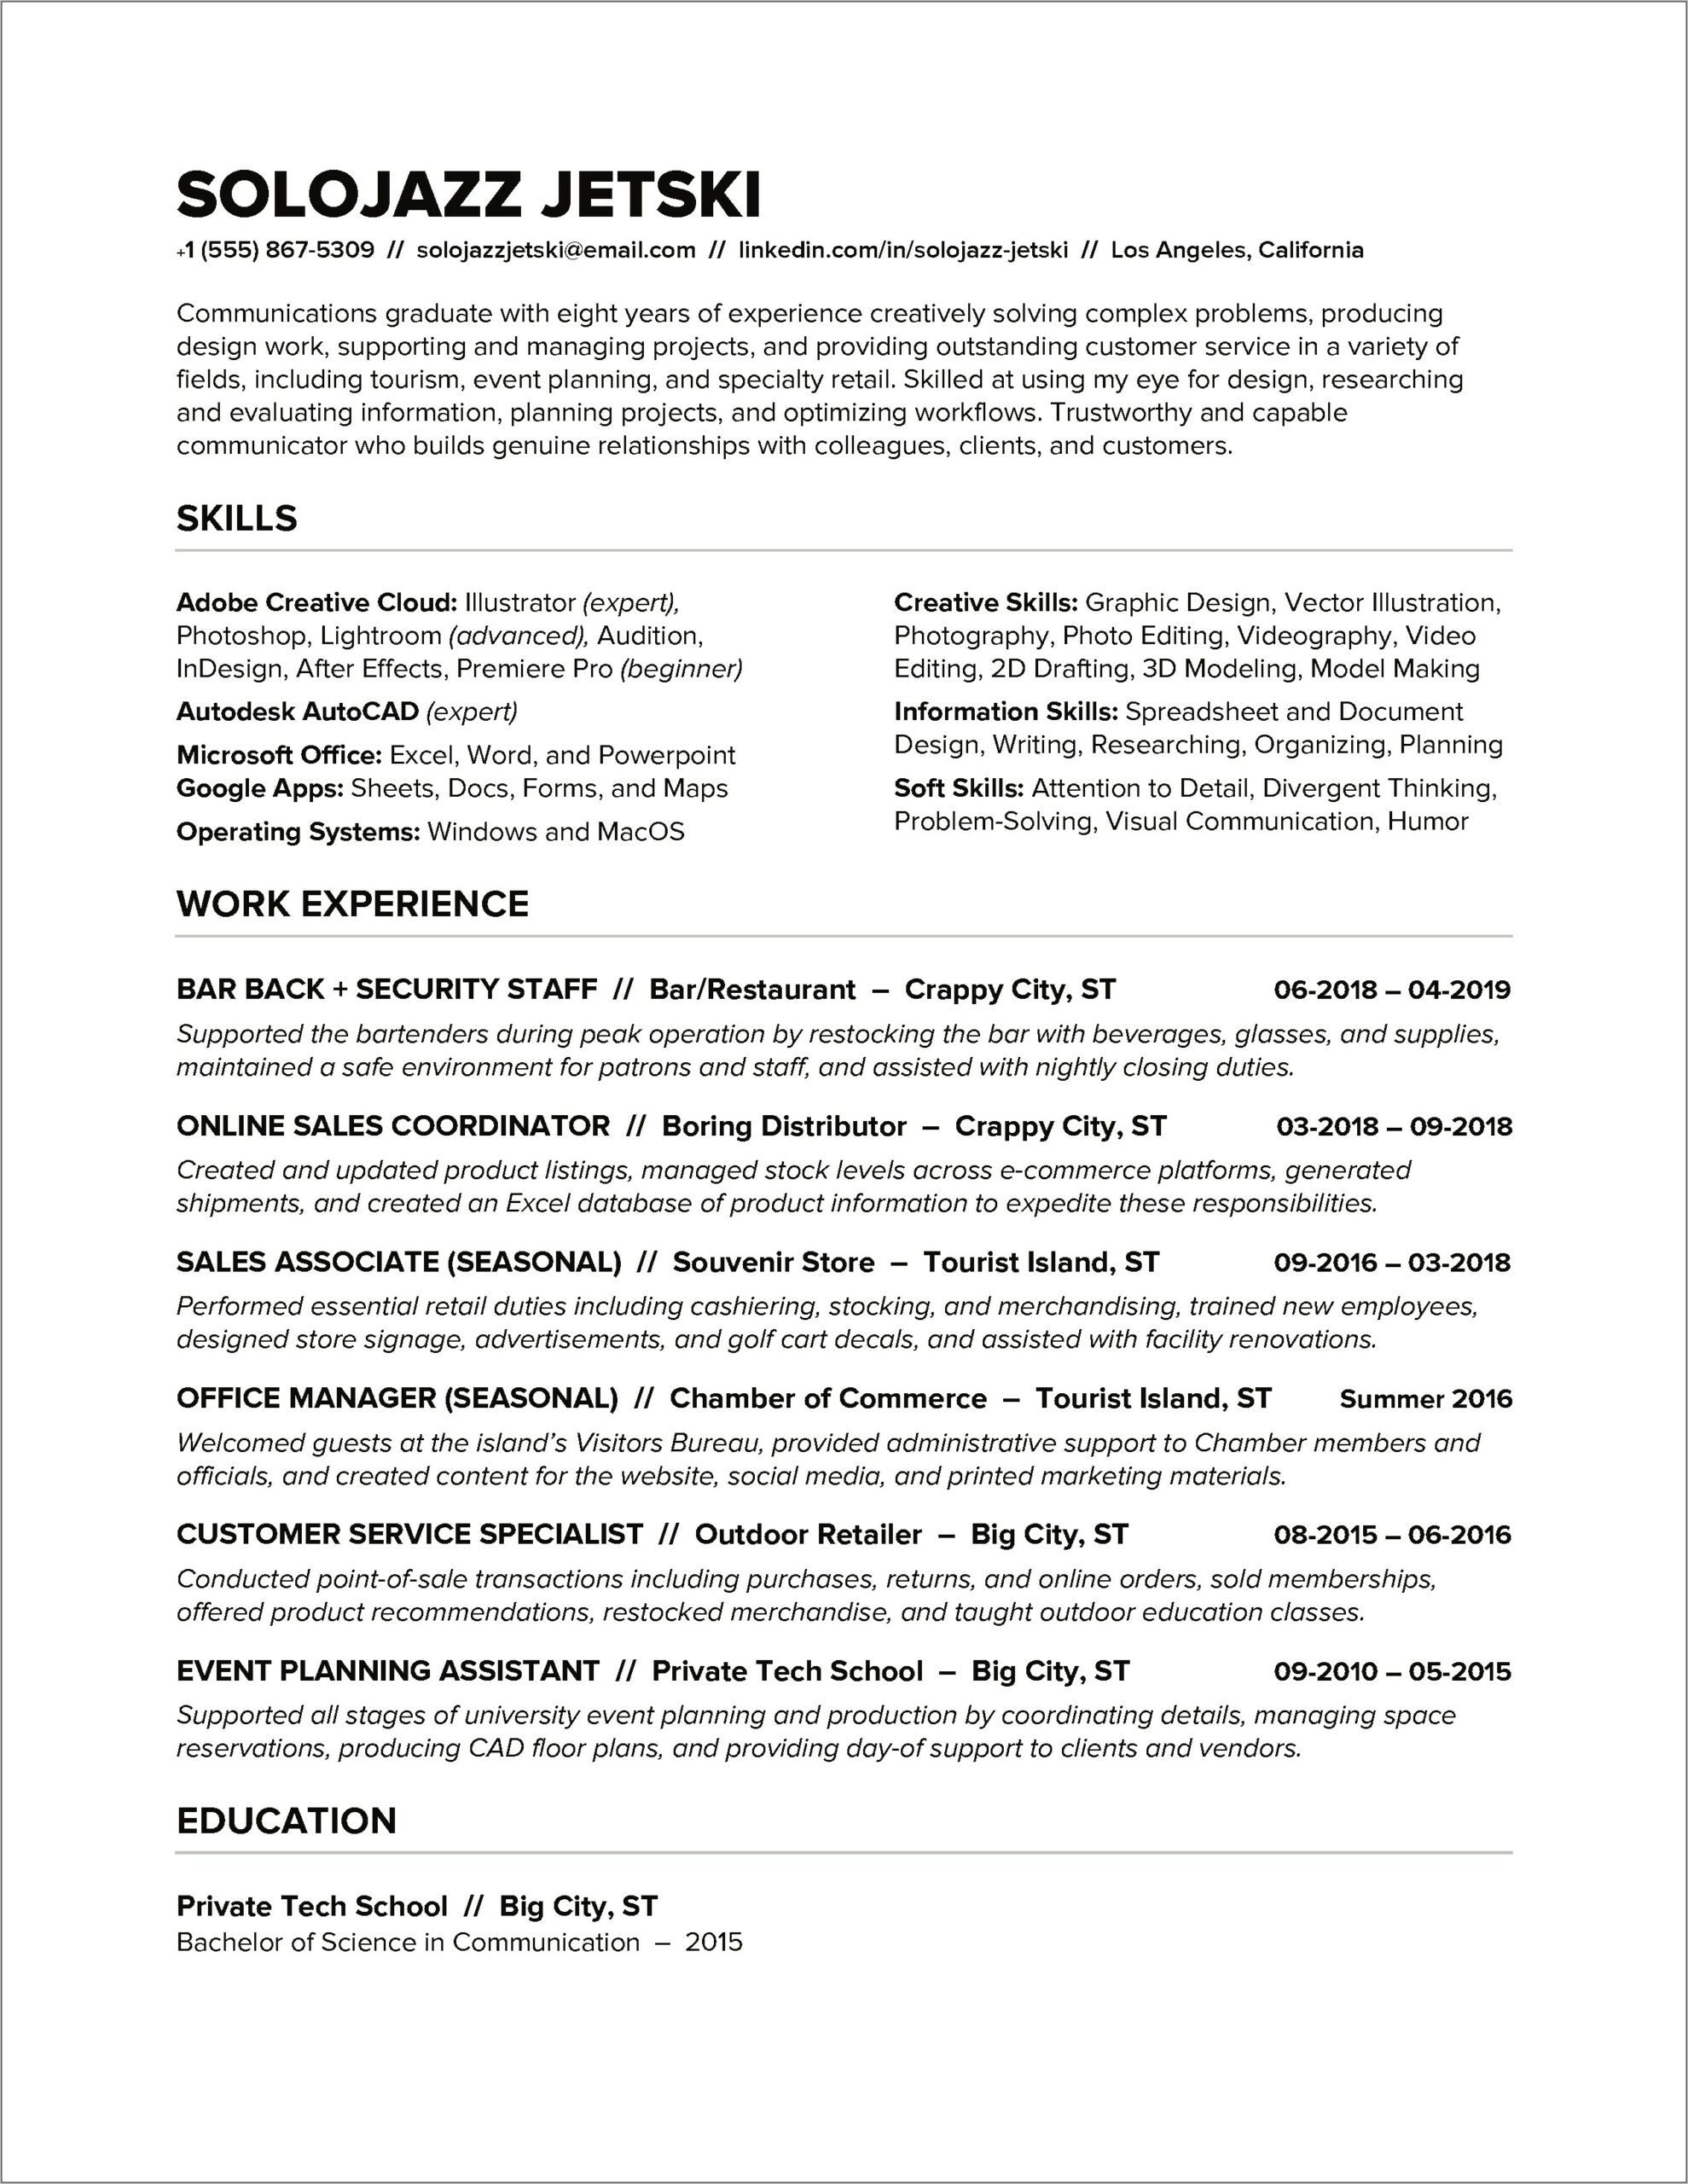 Created Experience To Put On A Resume